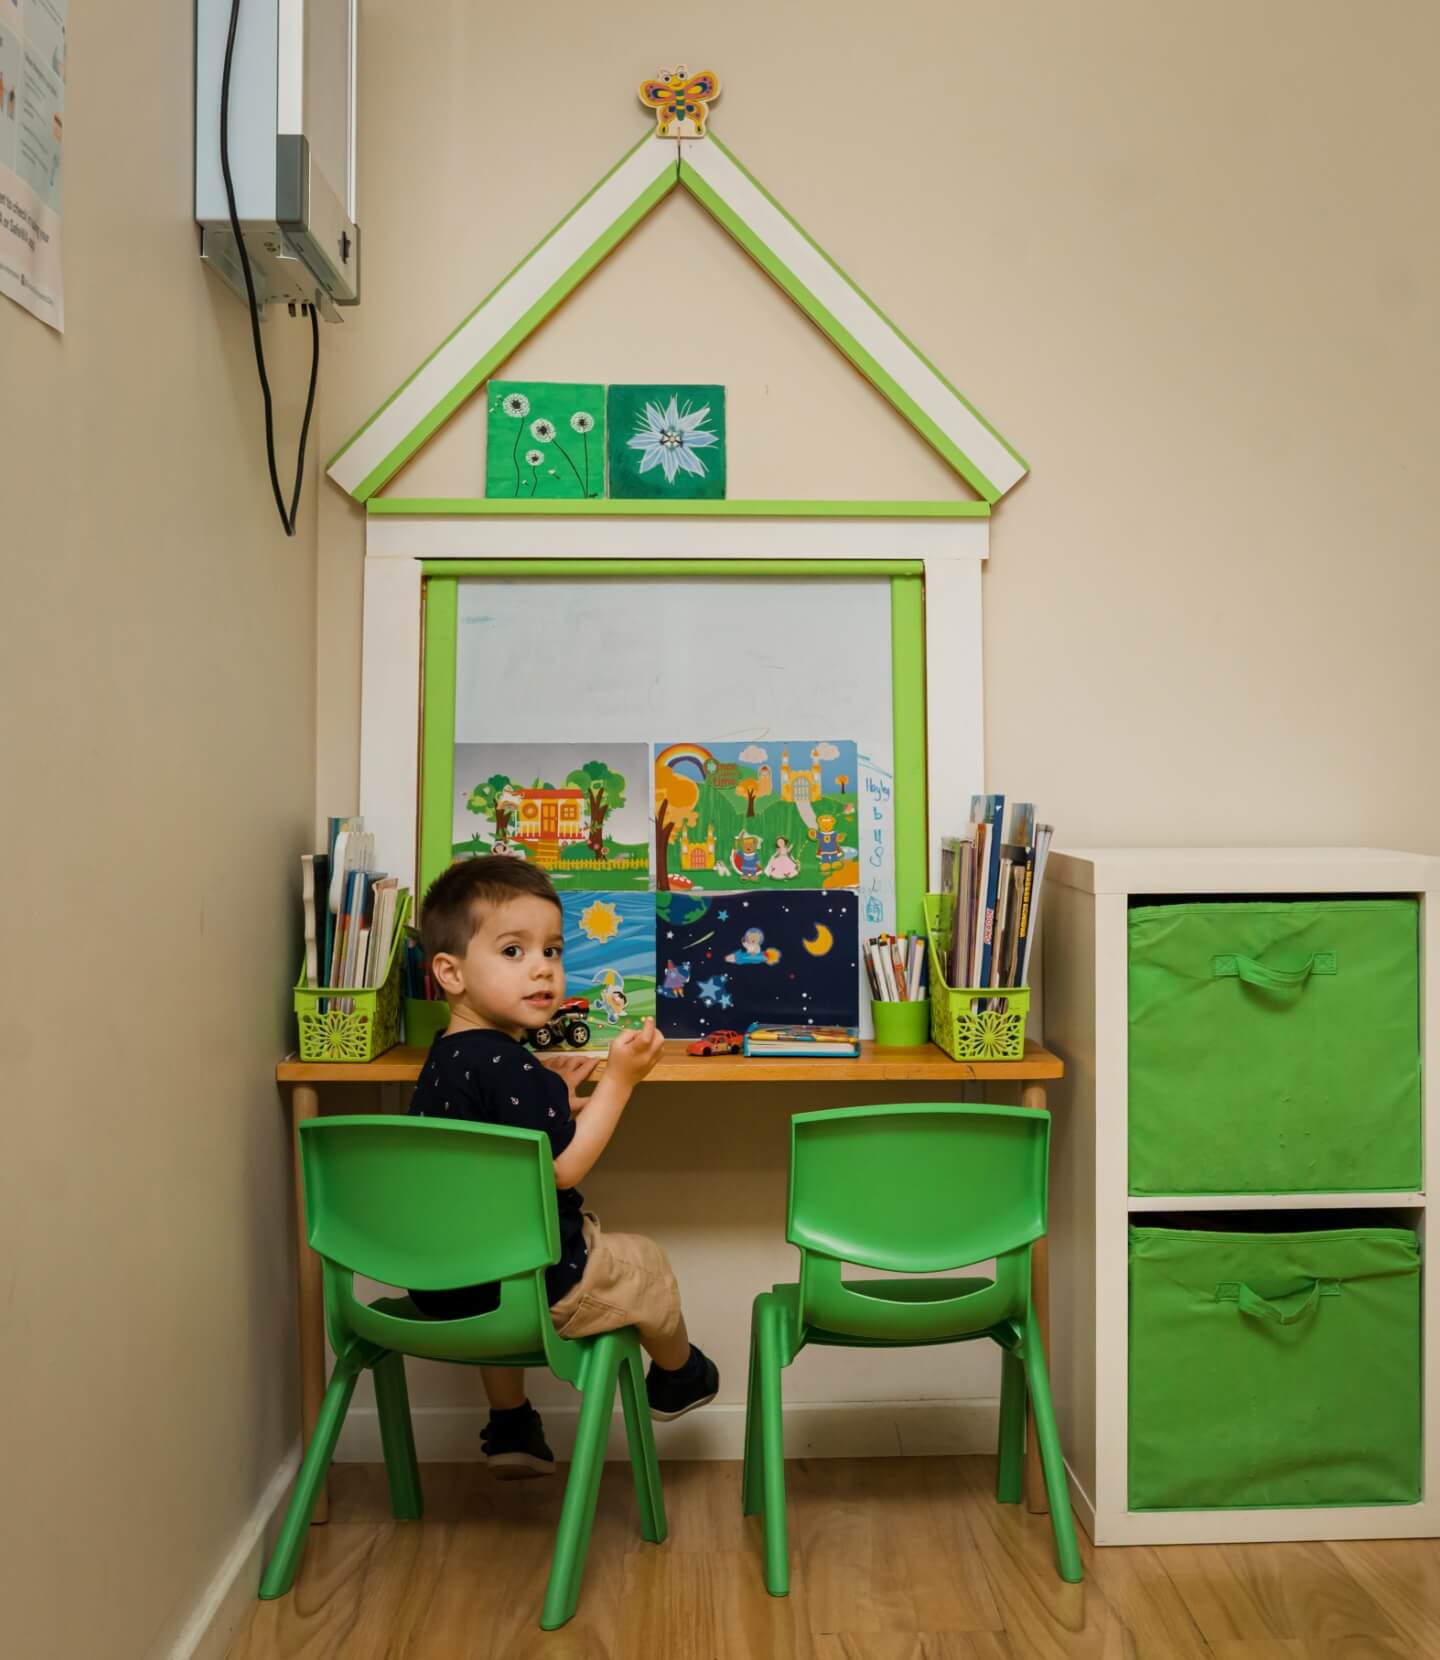 A child sitting at a desk in a play area.